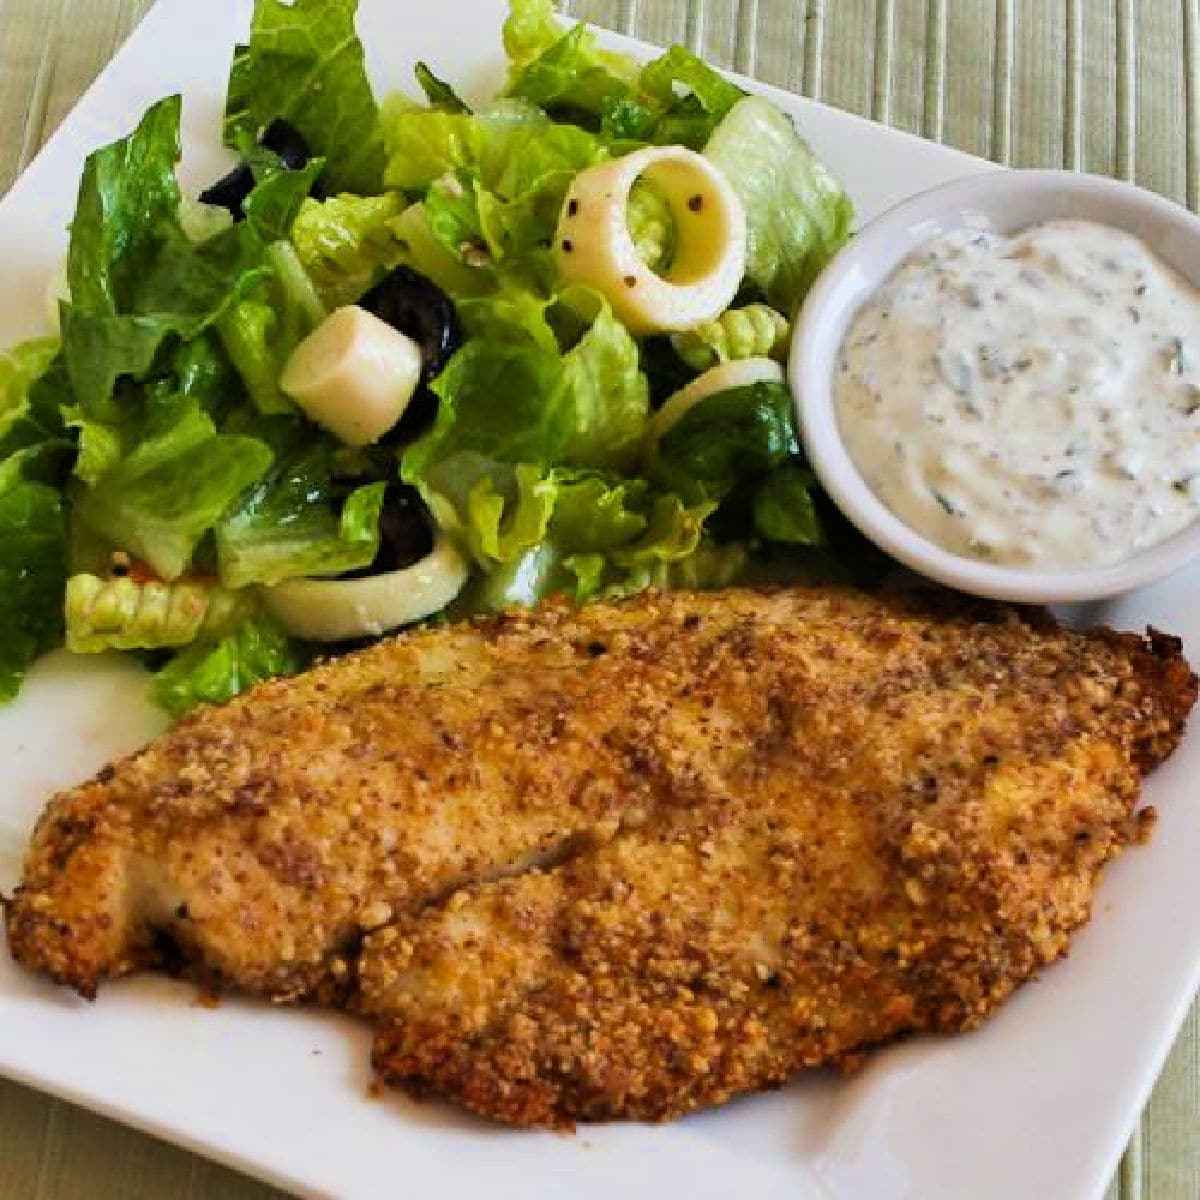 Square image of Almond and Parmesan Baked Fish shown on serving plate with salad and tartar sauce.